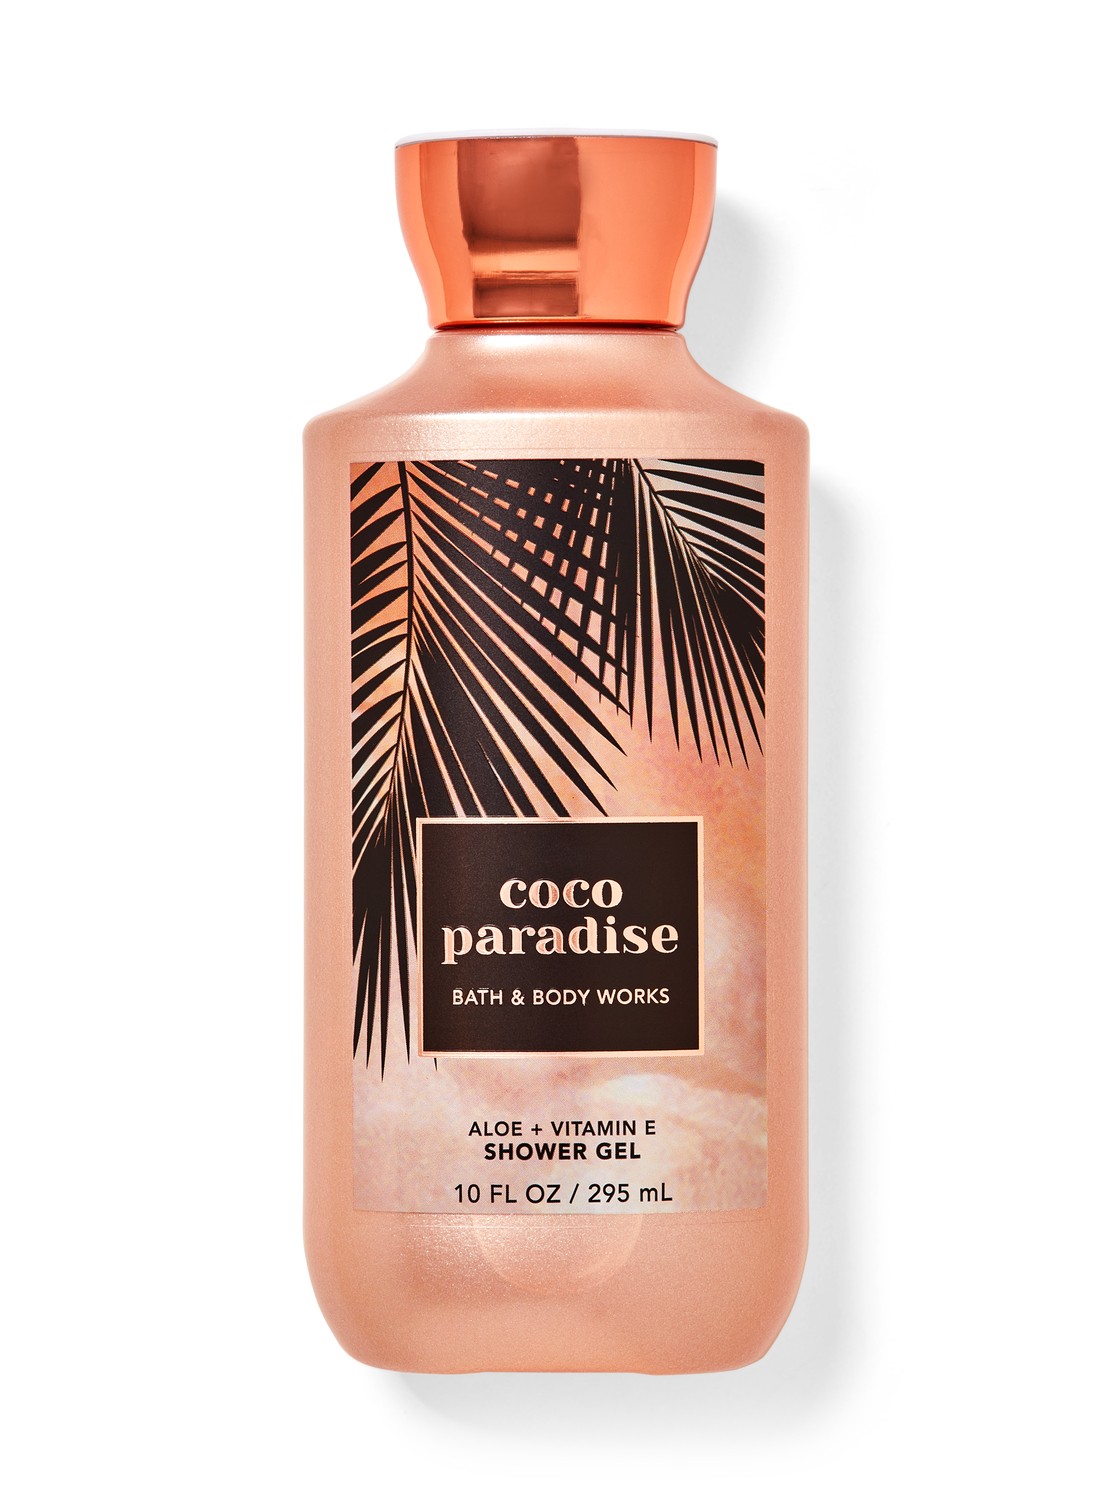 Perfume to match this scent (Coco Paradise) from Bath & Body Works